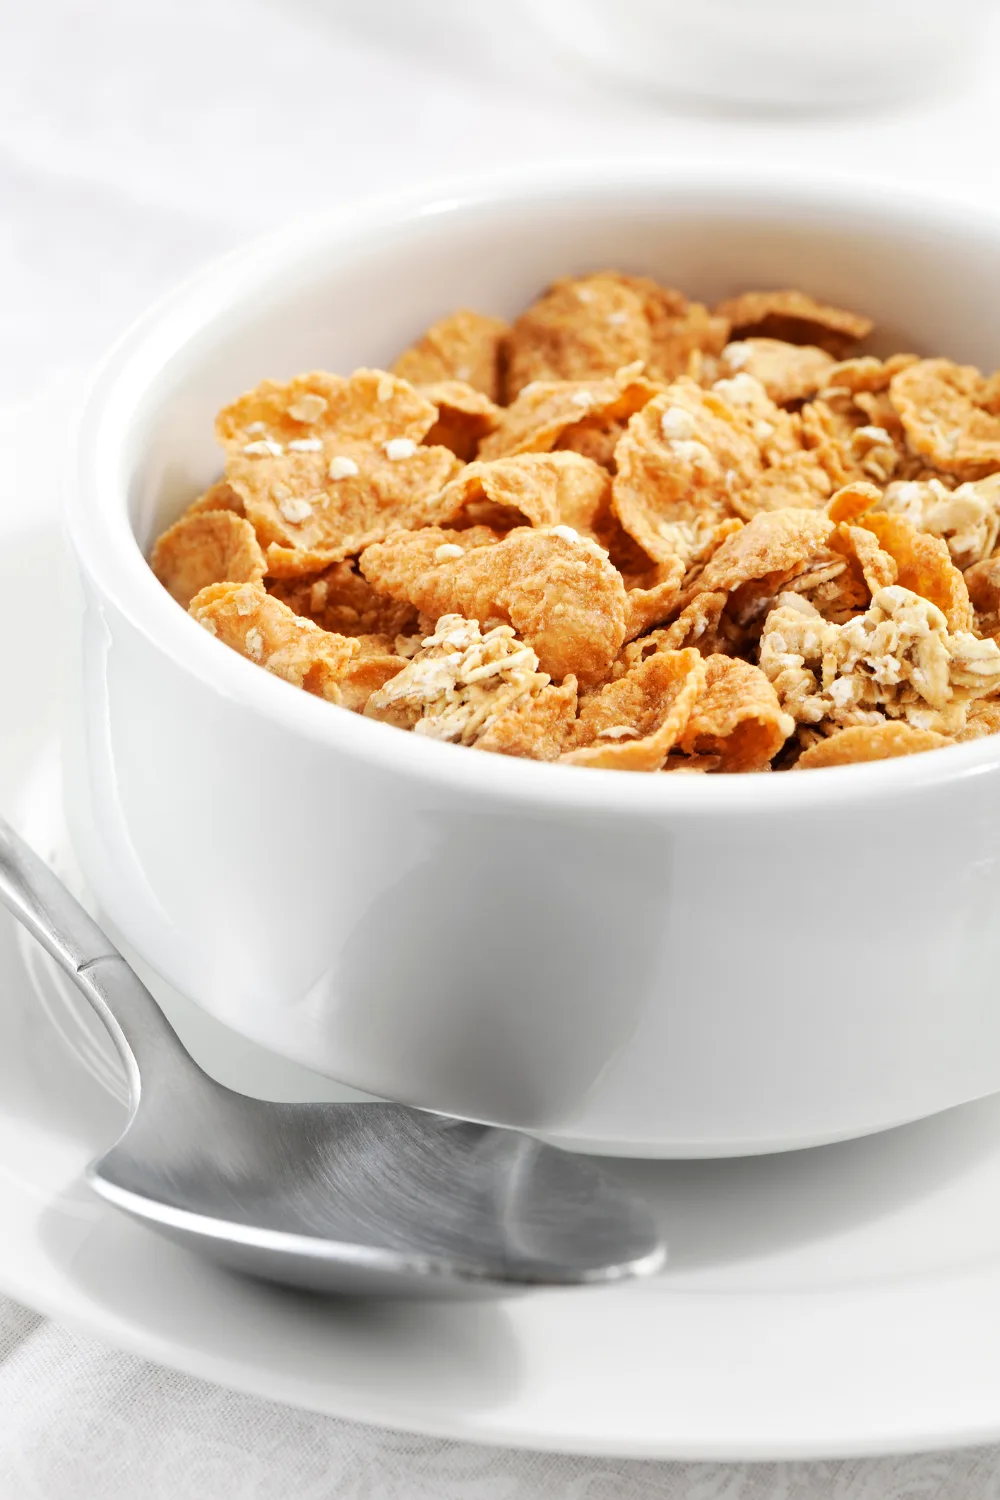 Iron rich Cereals Images